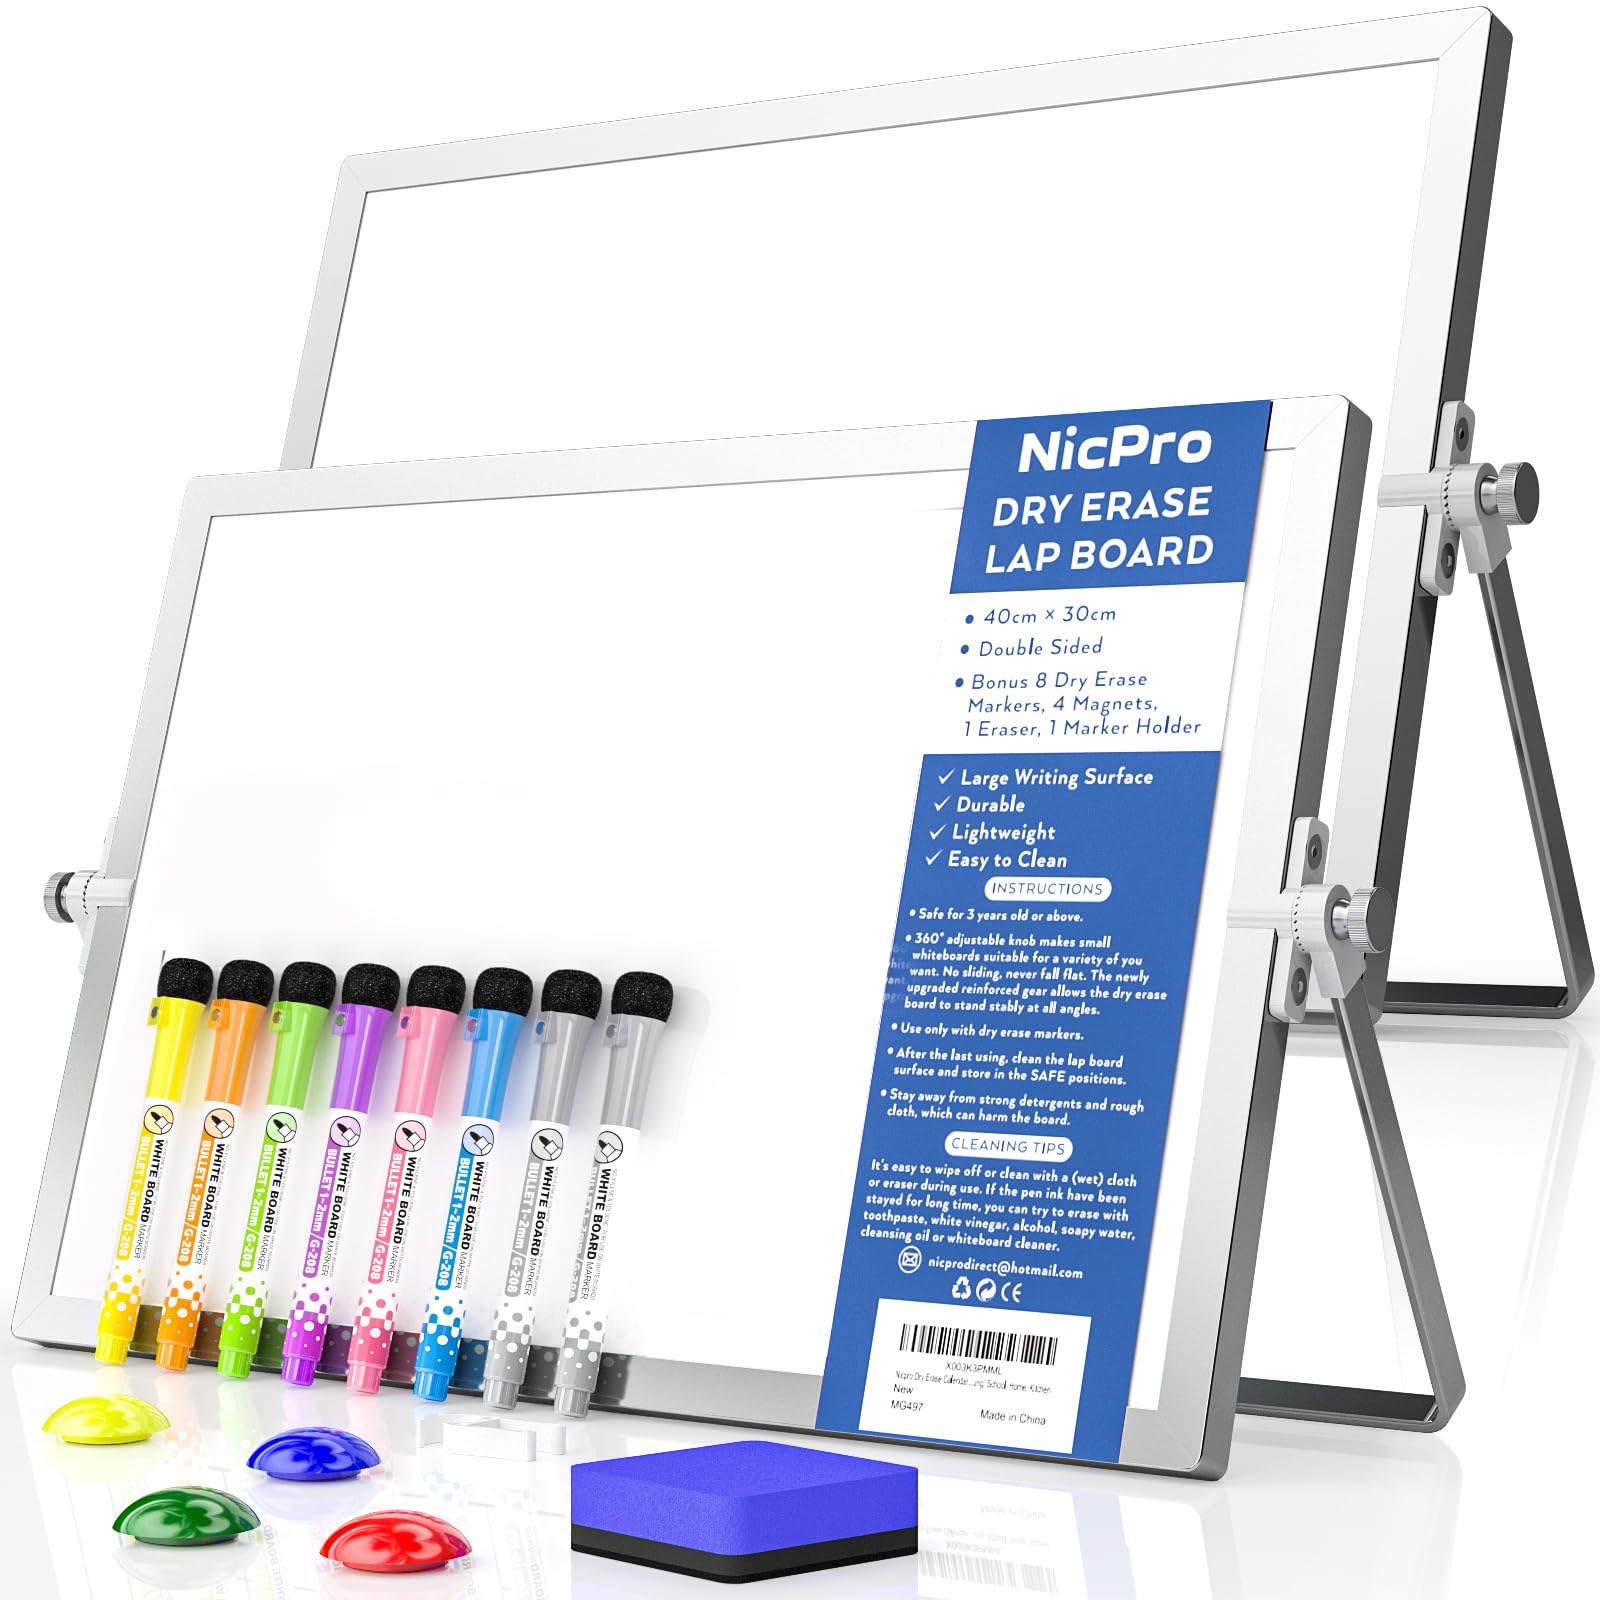 Nicpro Dry Erase Calendar Whiteboard, 12 x 16 inch Double Sided Large Magnetic Desktop White Board with Stand, 8 Pens, 1 Eraser, 4 Magnets, White Board Easel for Kids Memo to Do List Students School